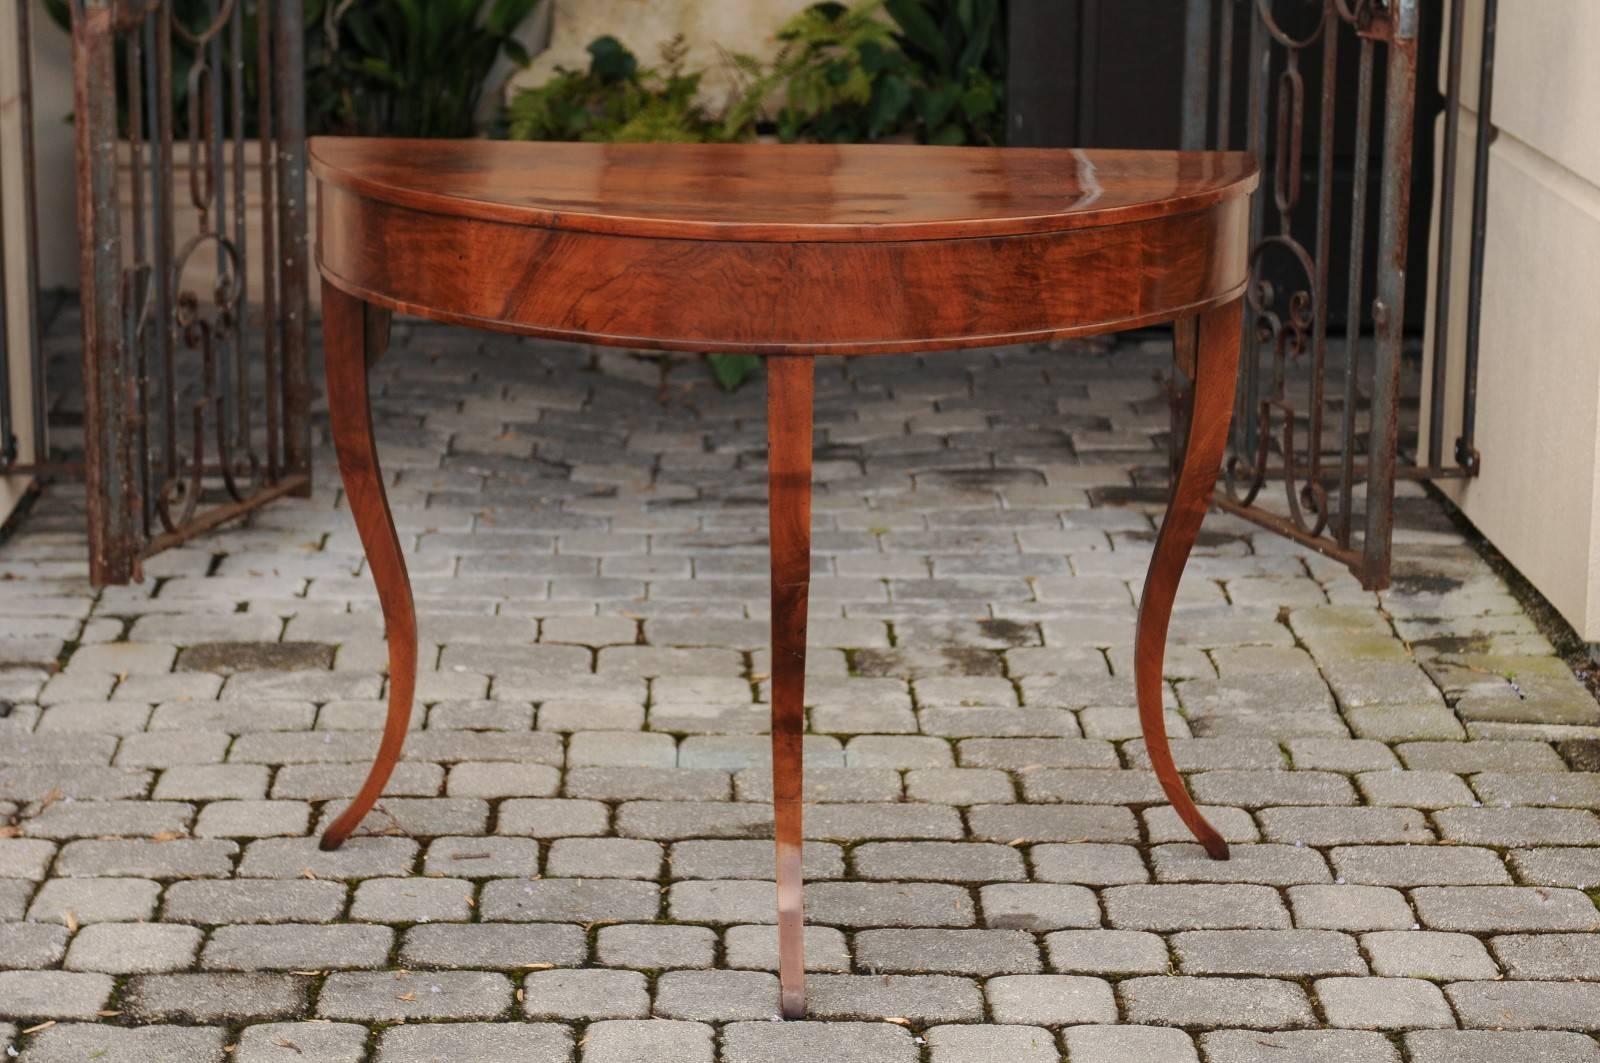 An Italian walnut demilune console table with tripod base from the first half of the 19th century. This Italian demilune features a semi-circular top, sitting above a bookmark veneered apron. The table is raised on three elegant curved legs, with